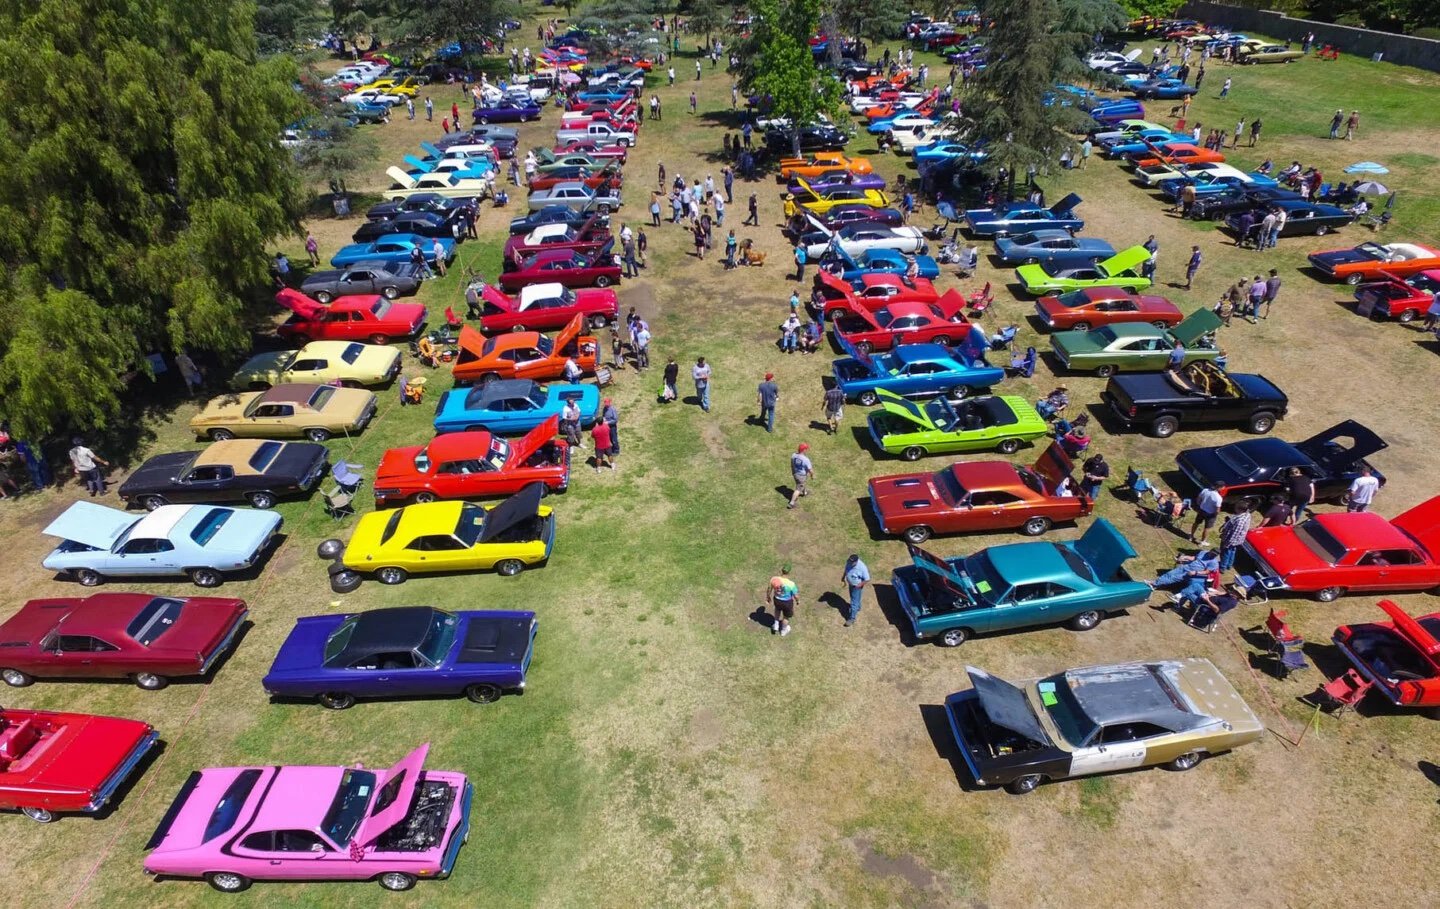 Top Picks from the 36th Annual CPW Mopar Spring Fling Show